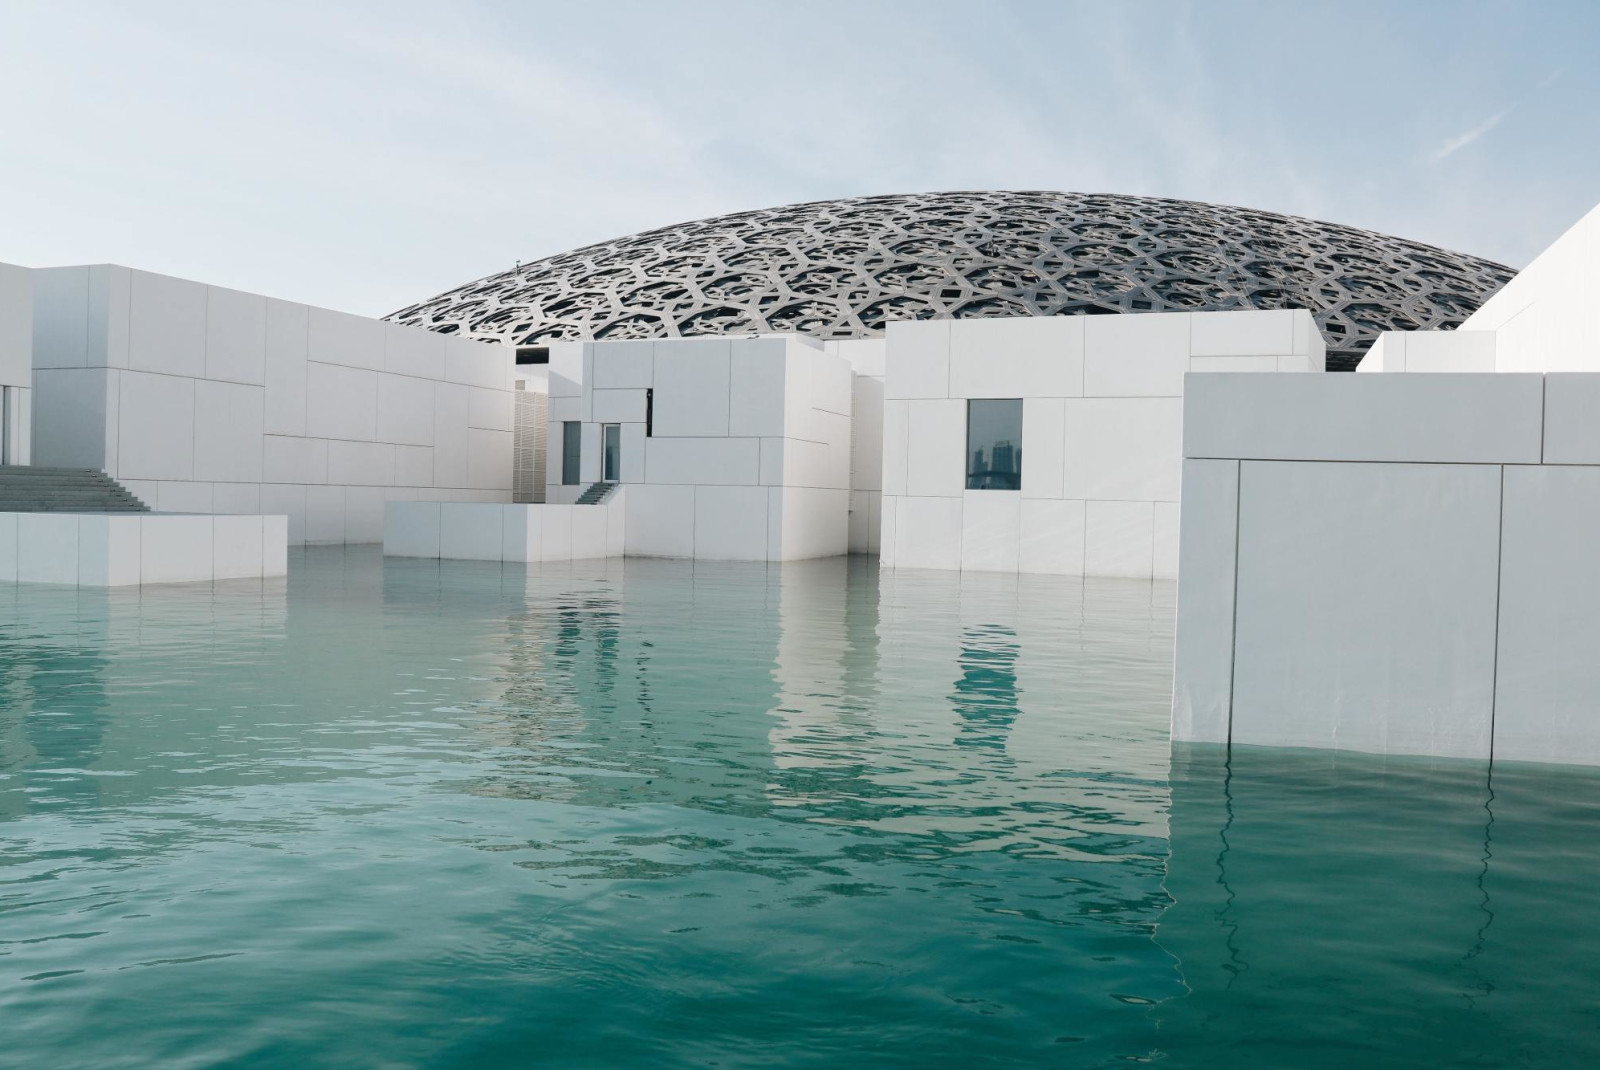 Modern white buildings and circular dome in Louvre Abu Dhabi on a sunny day.